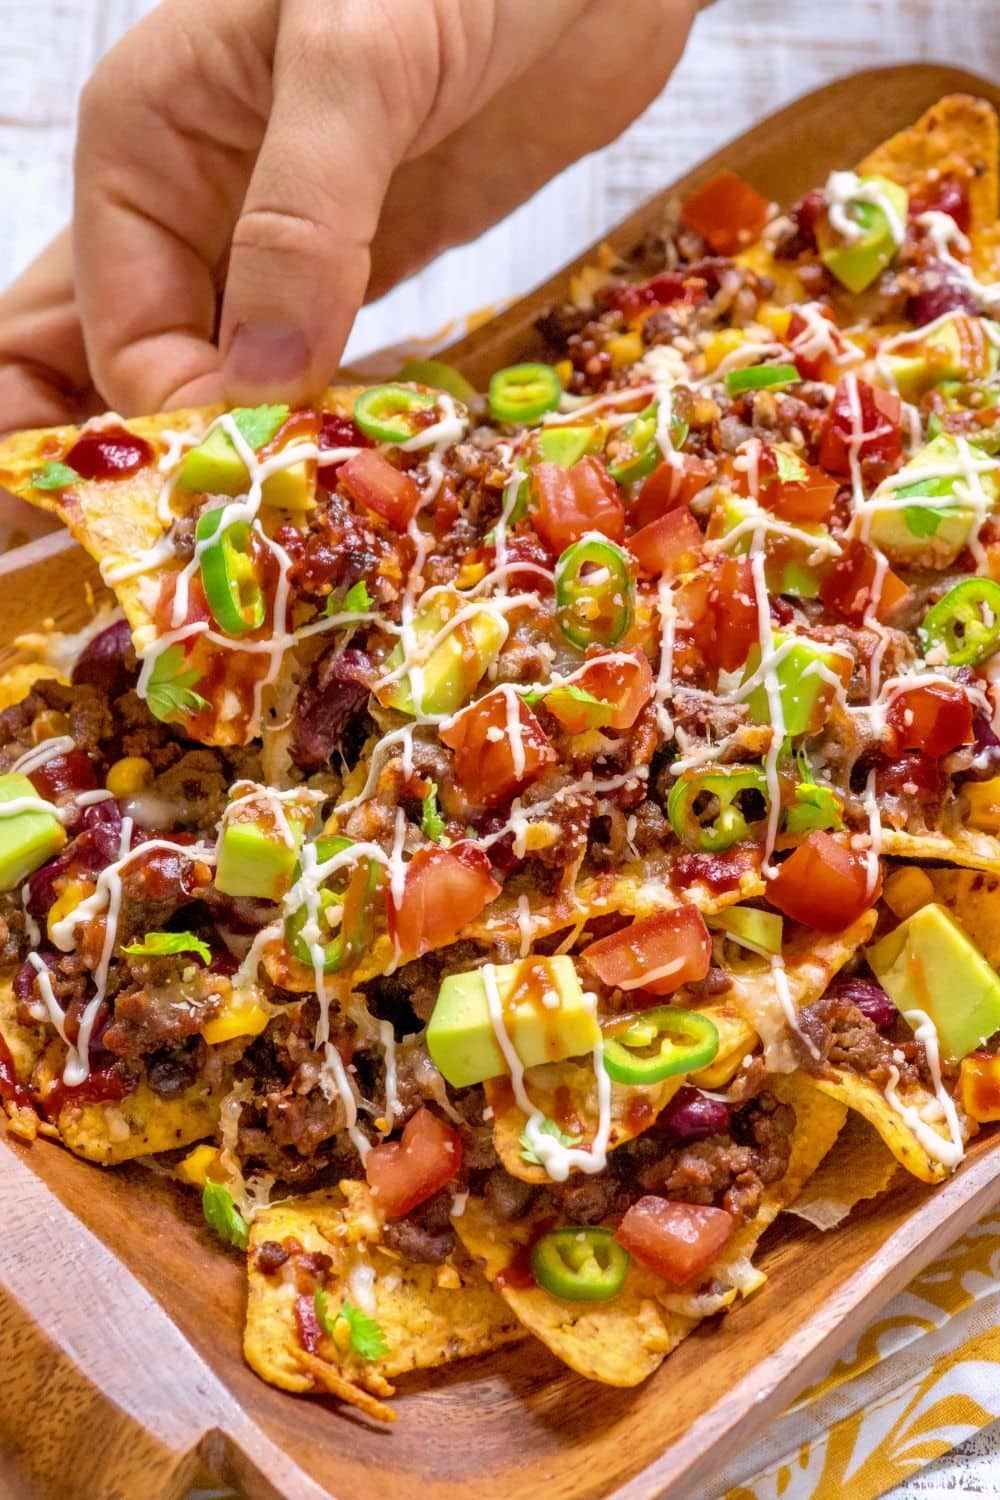 Spicy Nachos with Avocado, Tomatoes and Guacamole